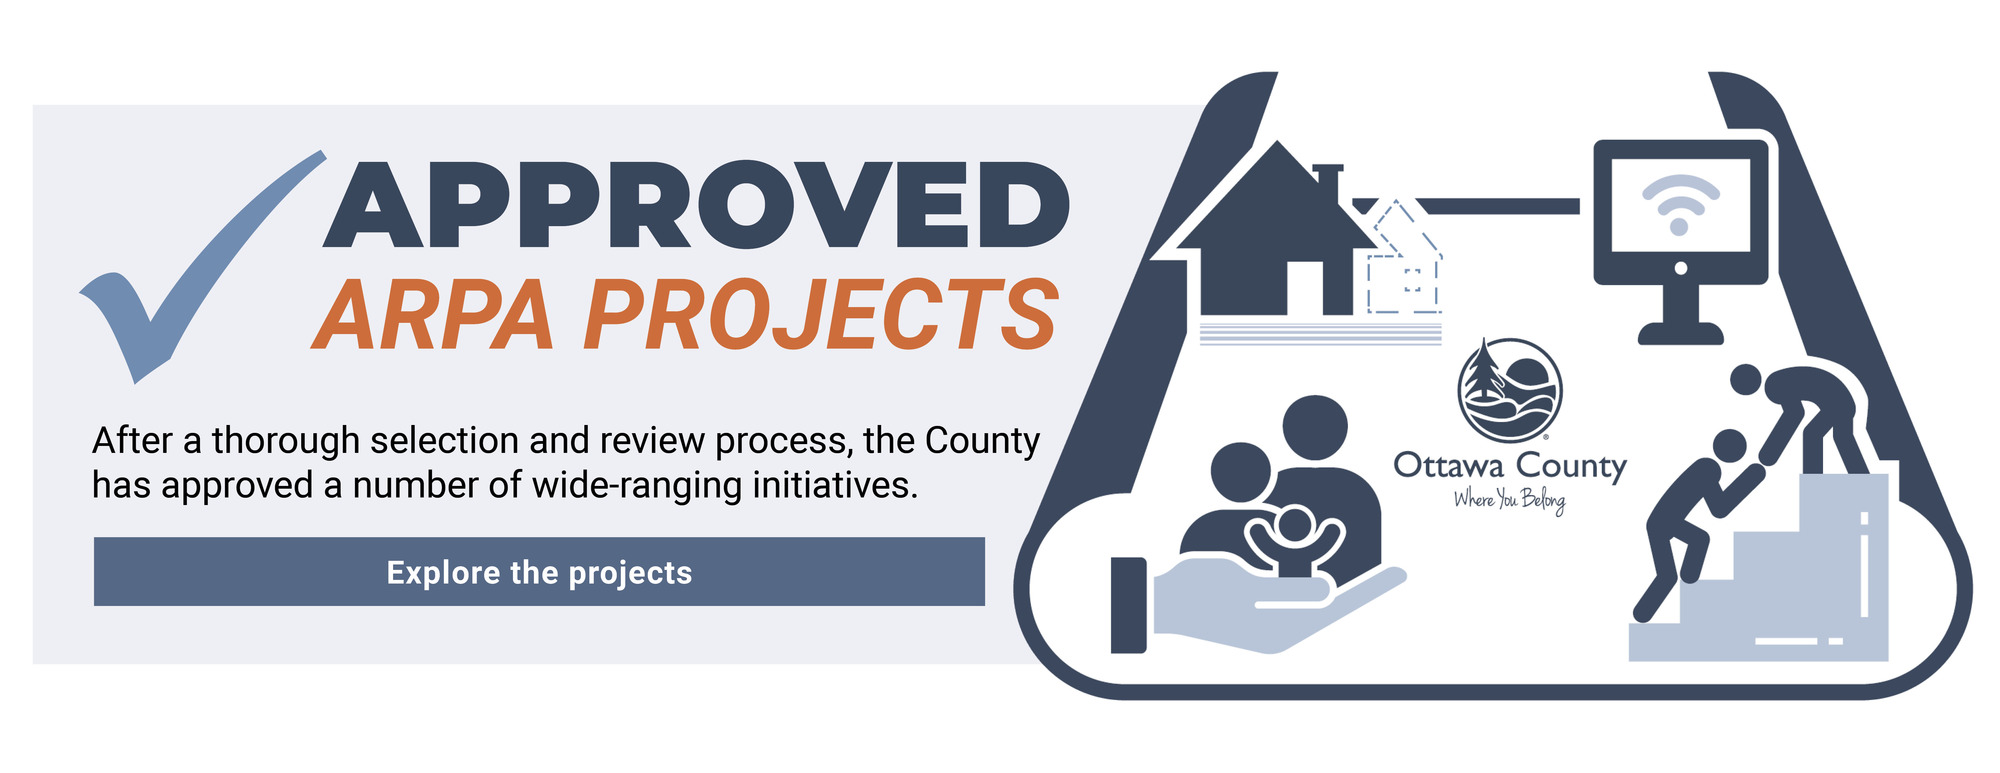 County approves ARPA projects